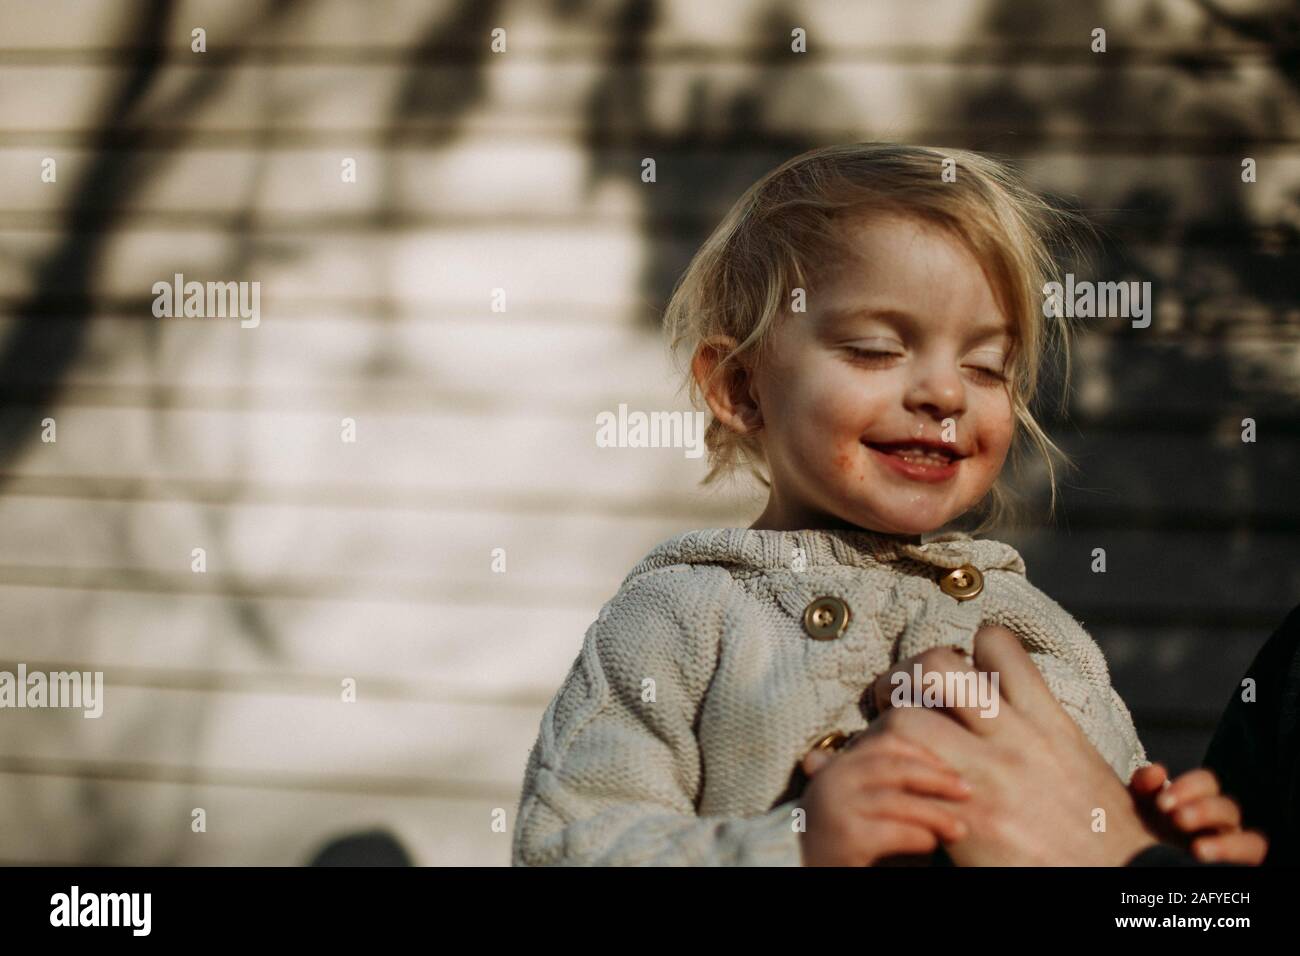 toddler smiling with eyes closed in sunlight Stock Photo